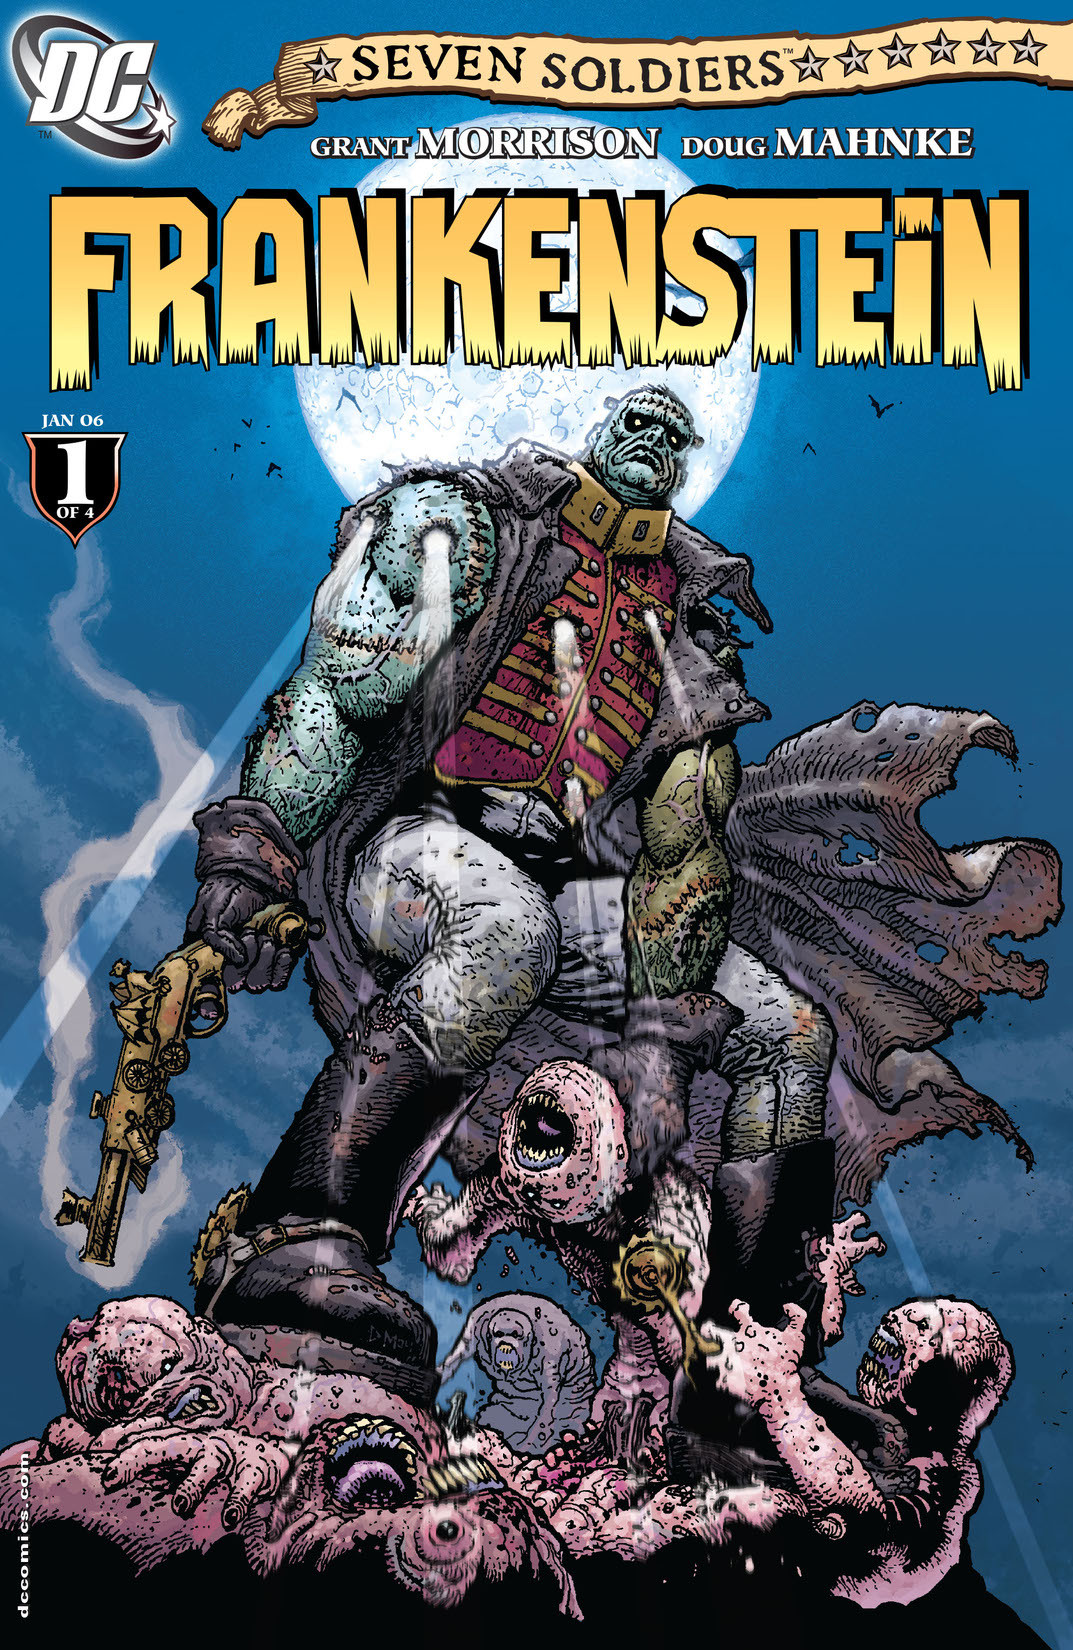 Seven Soldiers: Frankenstein #1 preview images